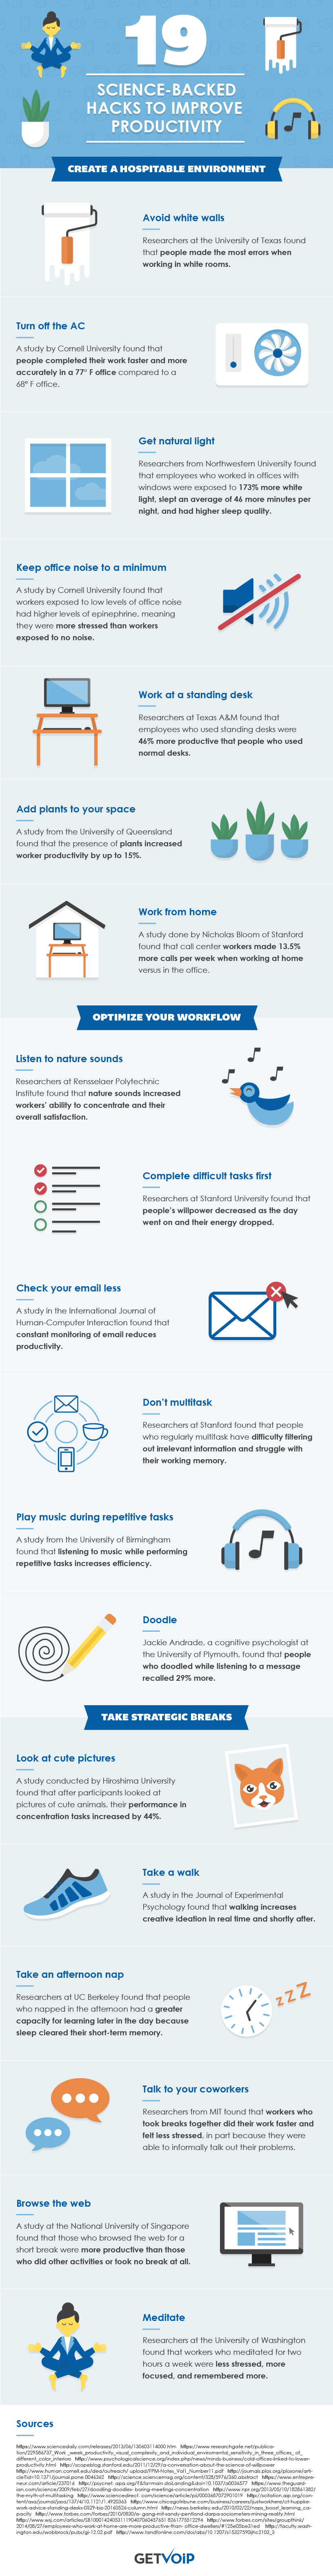 19 Science-Backed Hacks to Improve Productivity - #Infographic